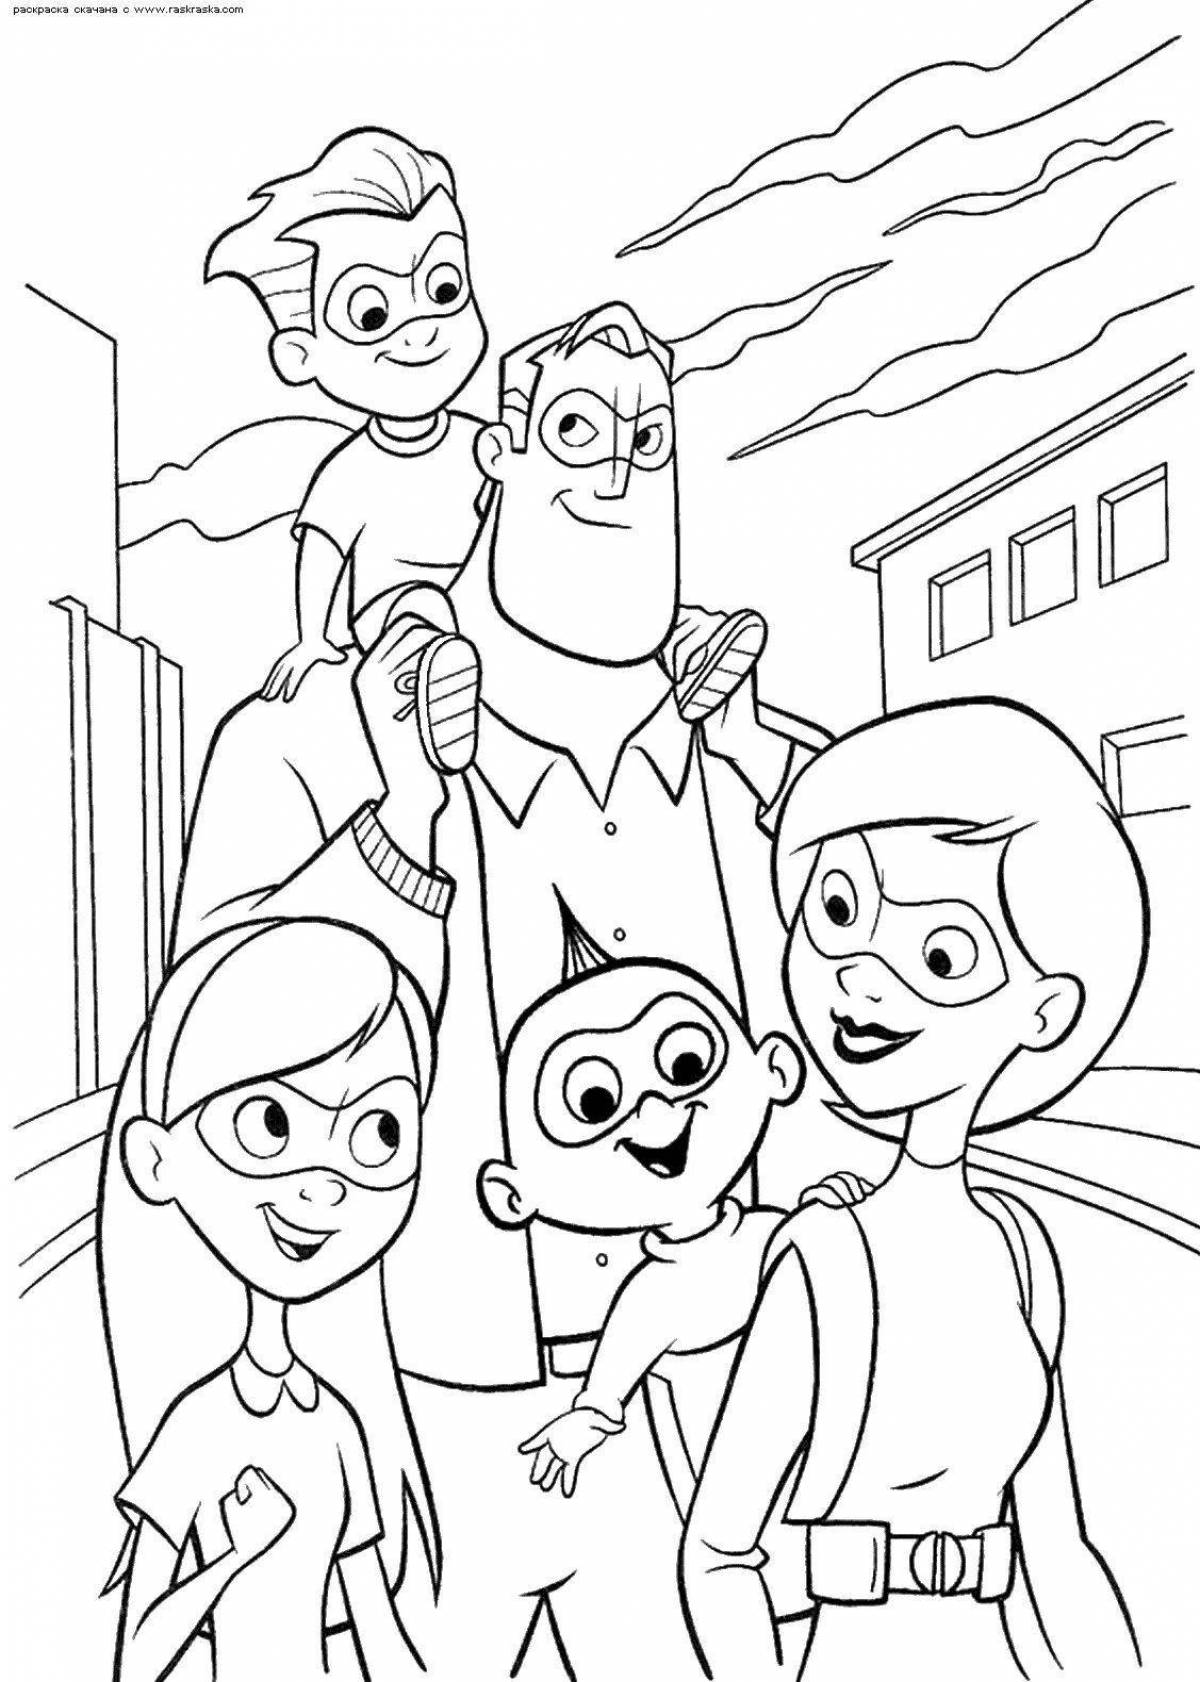 Beautiful Incredibles coloring pages for kids